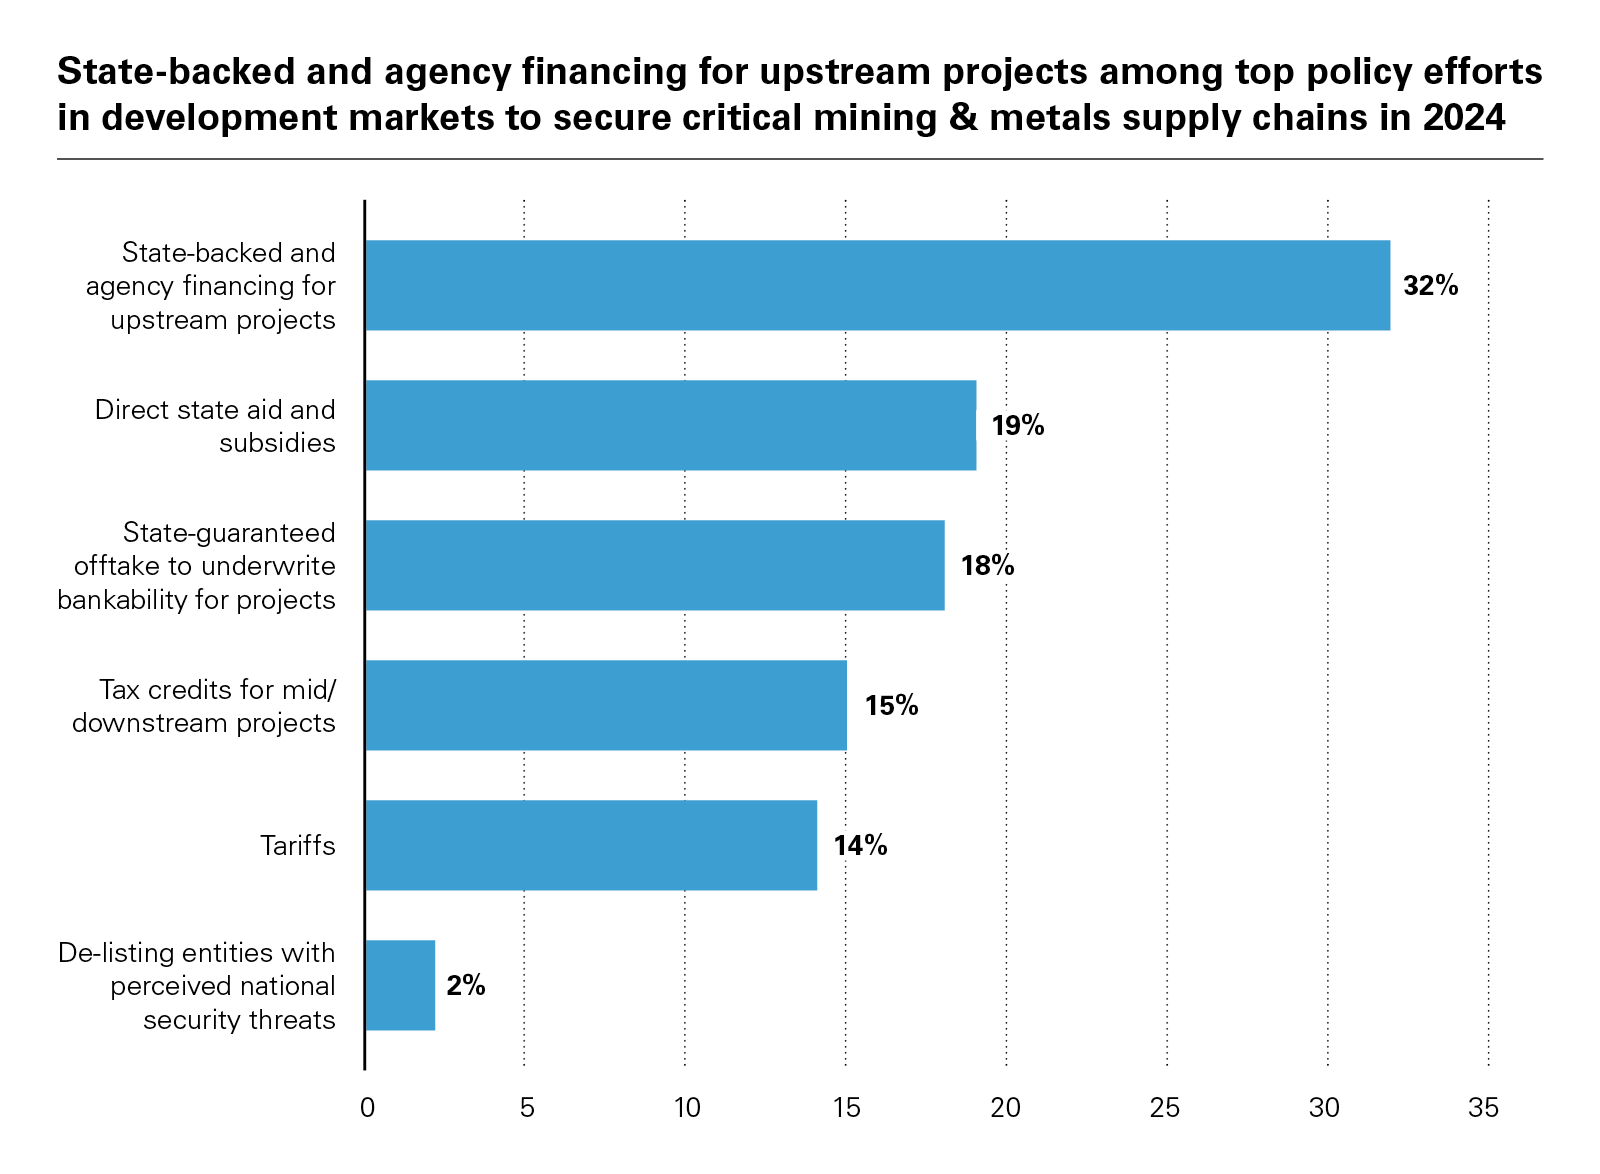 State-backed and agency financing for upstream projects among top policy efforts in development markets to secure critical mining & metals supply chains in 2024